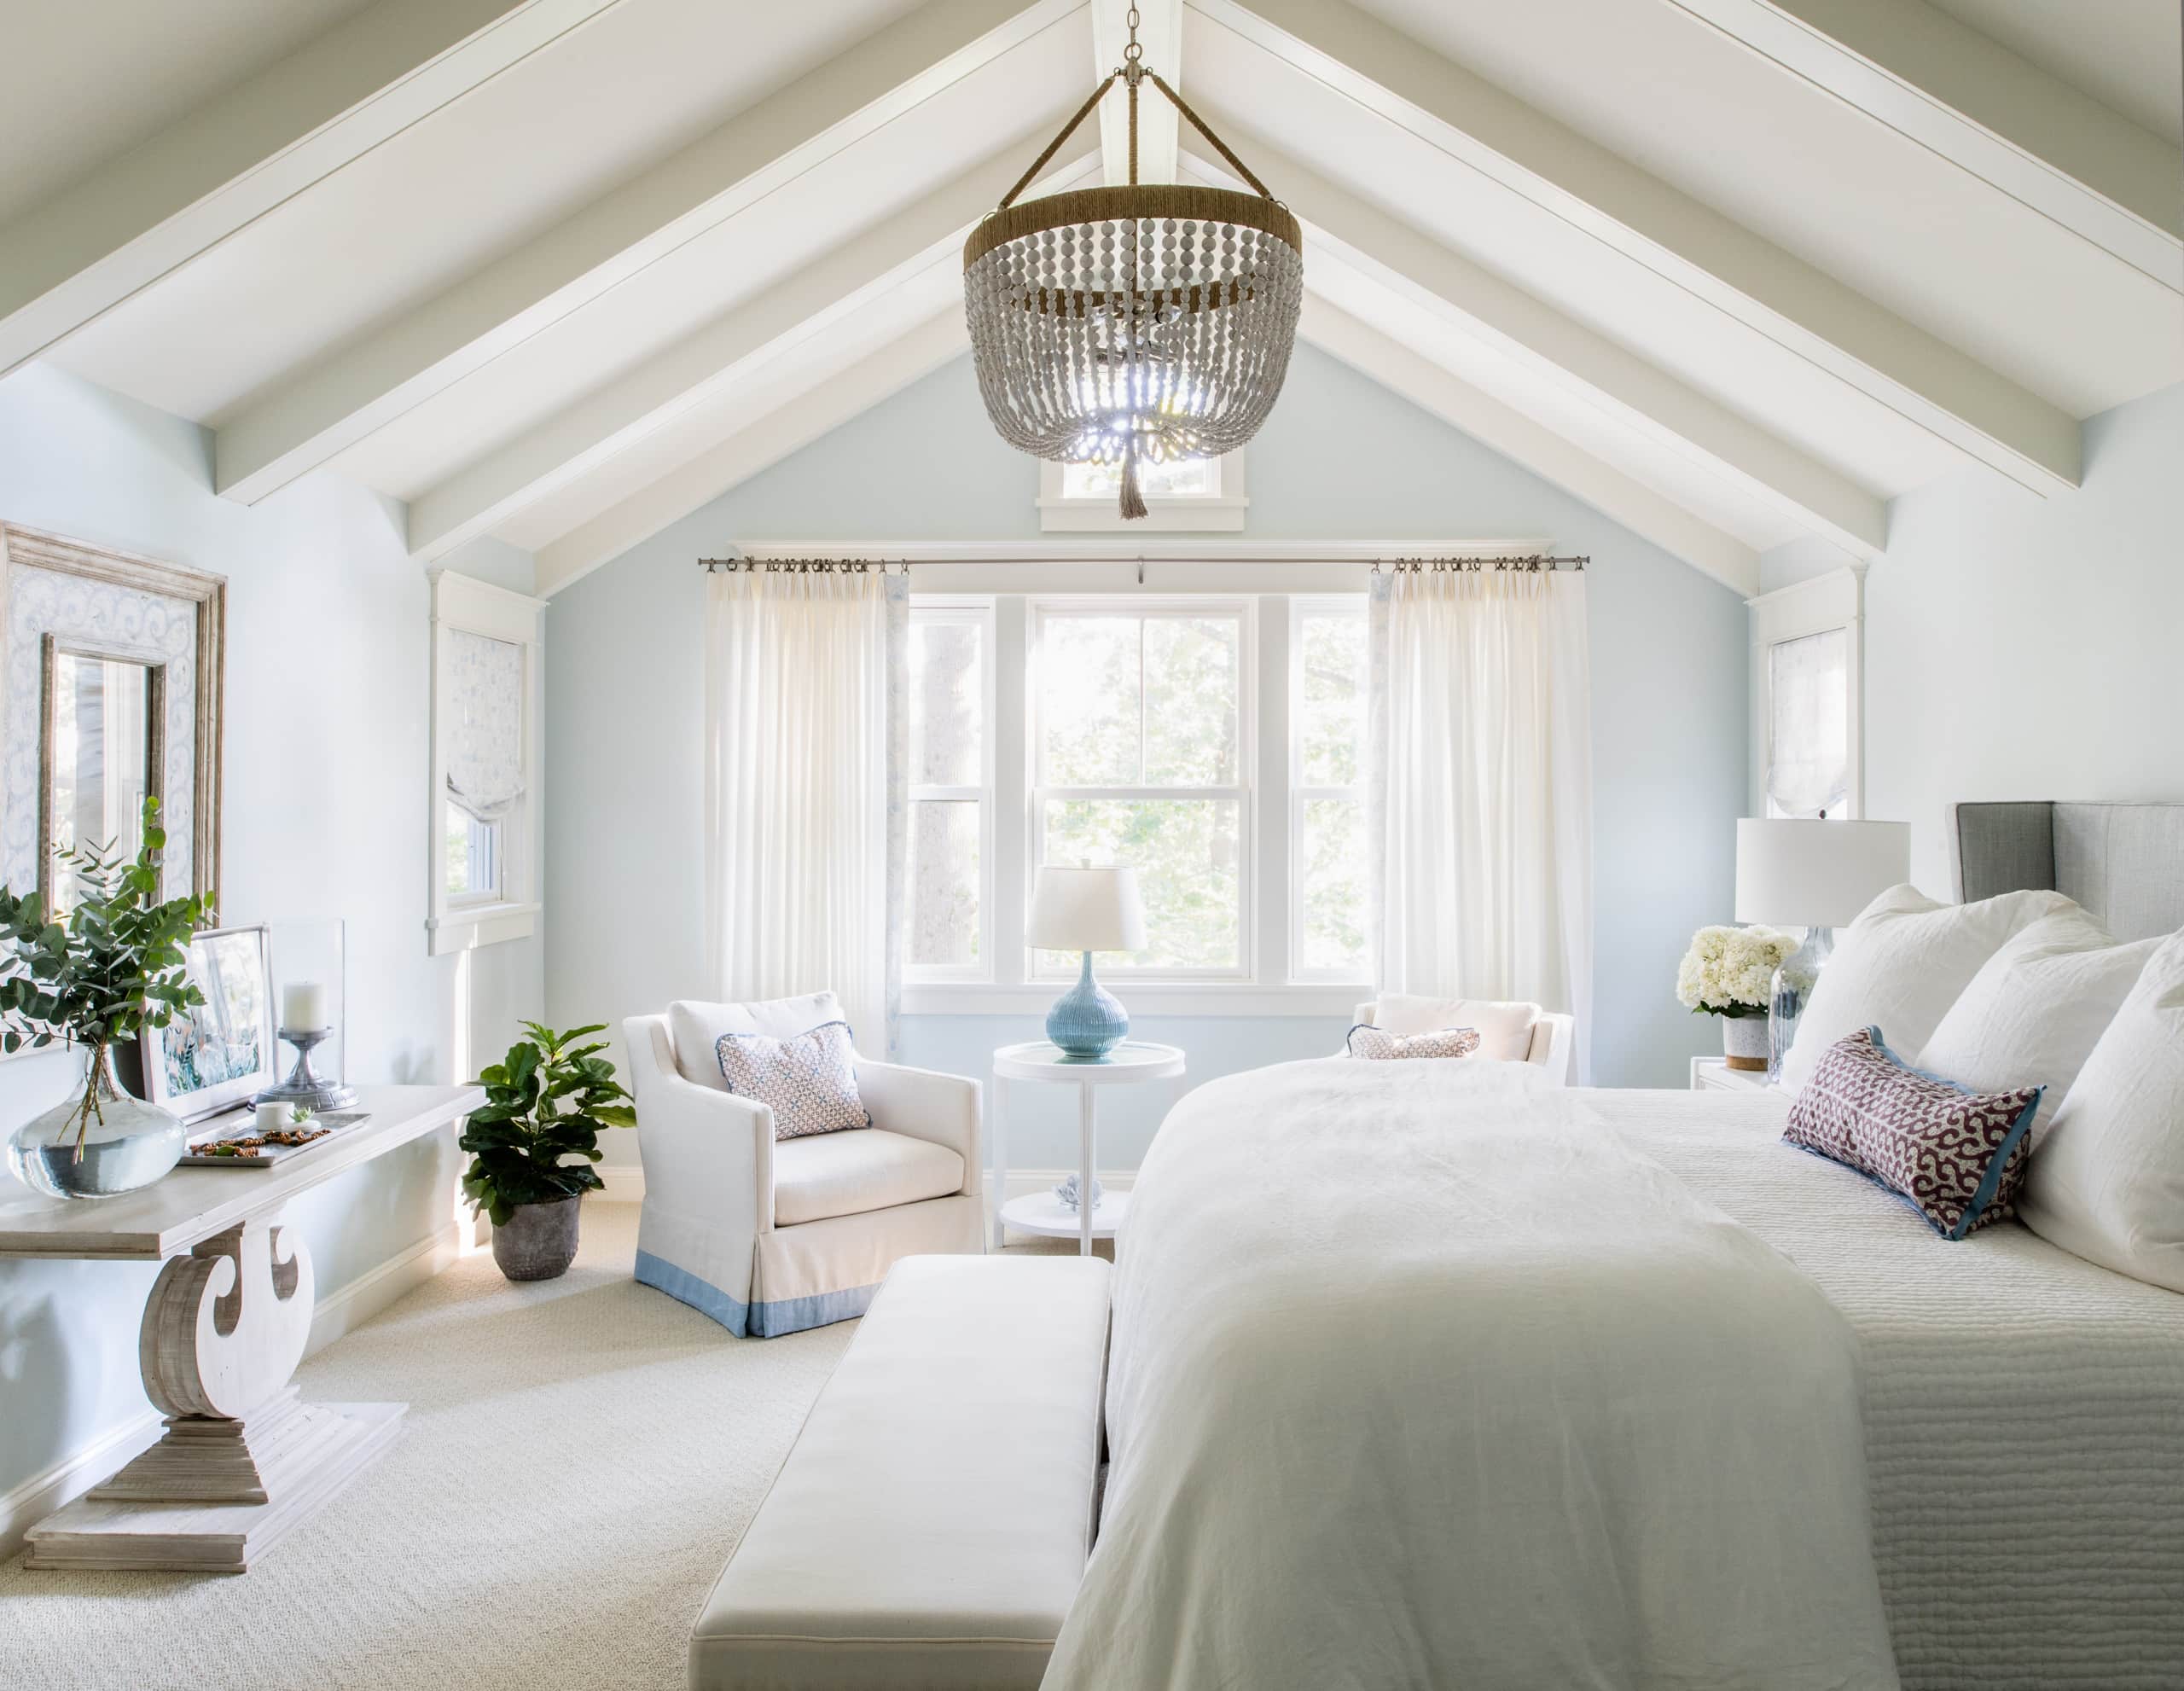 example of a beach style home, featuring a coastal bedroom in soft shades